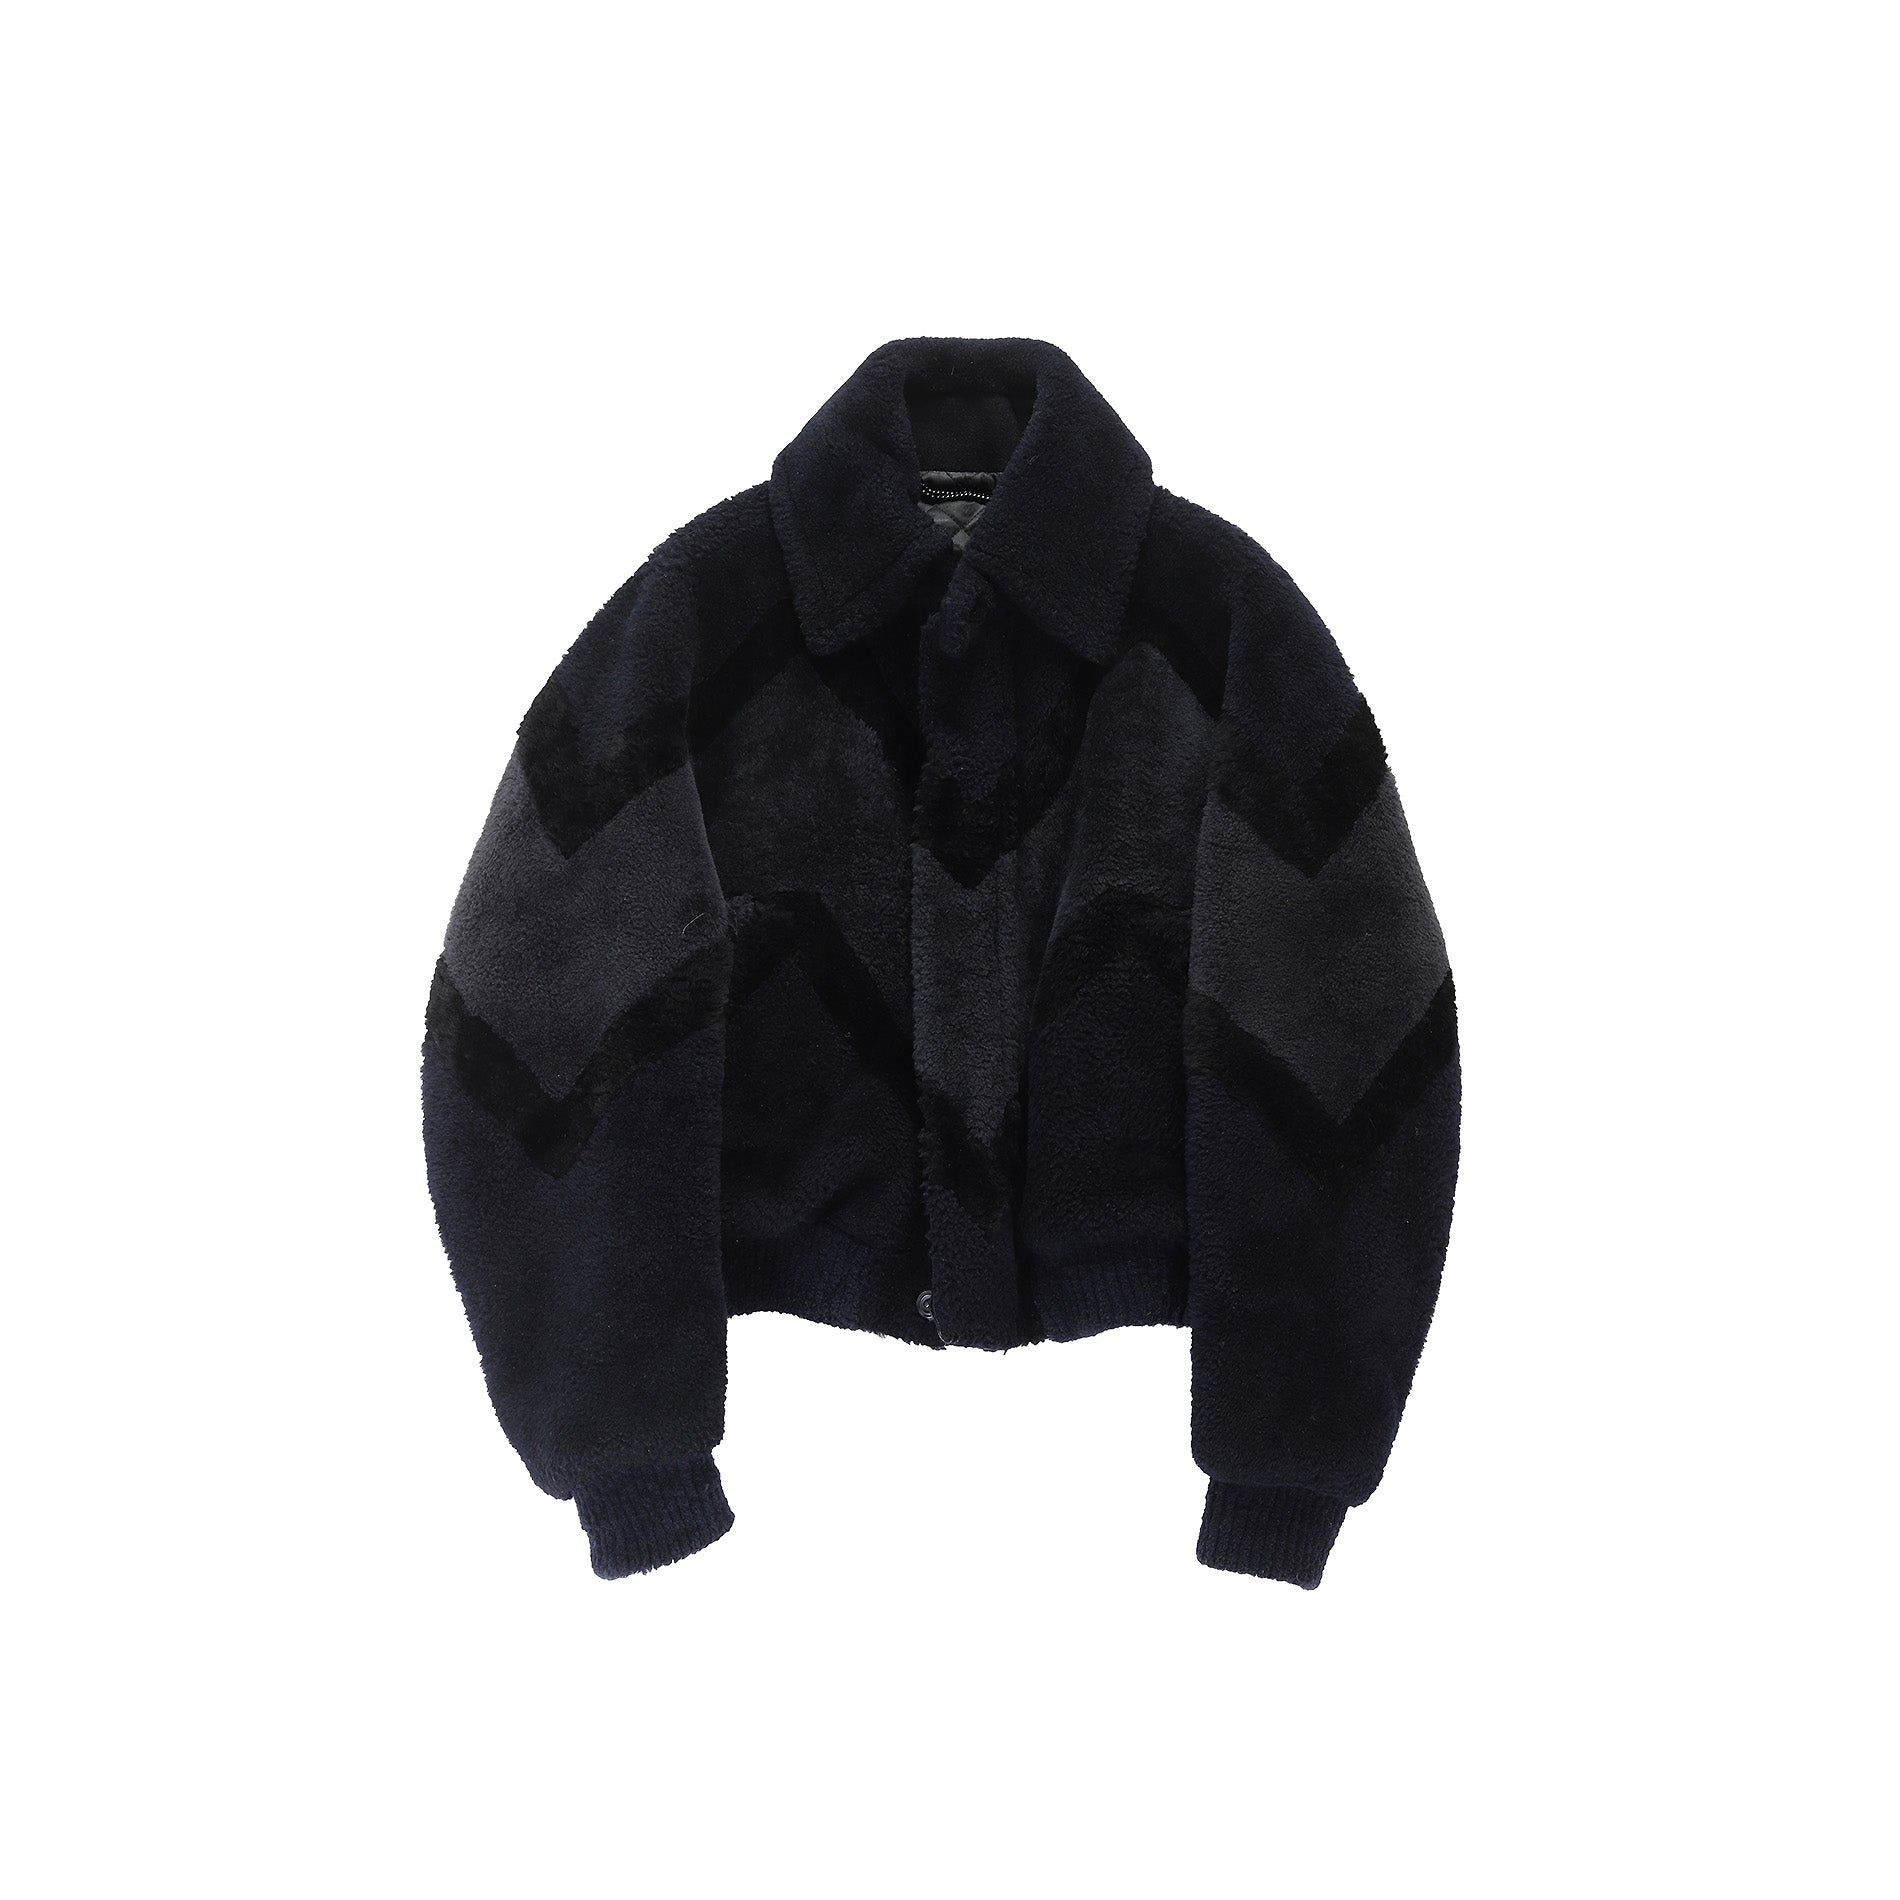 Burberry Prorsum FW13 Sample Shaved Shearling Bomber Jacket